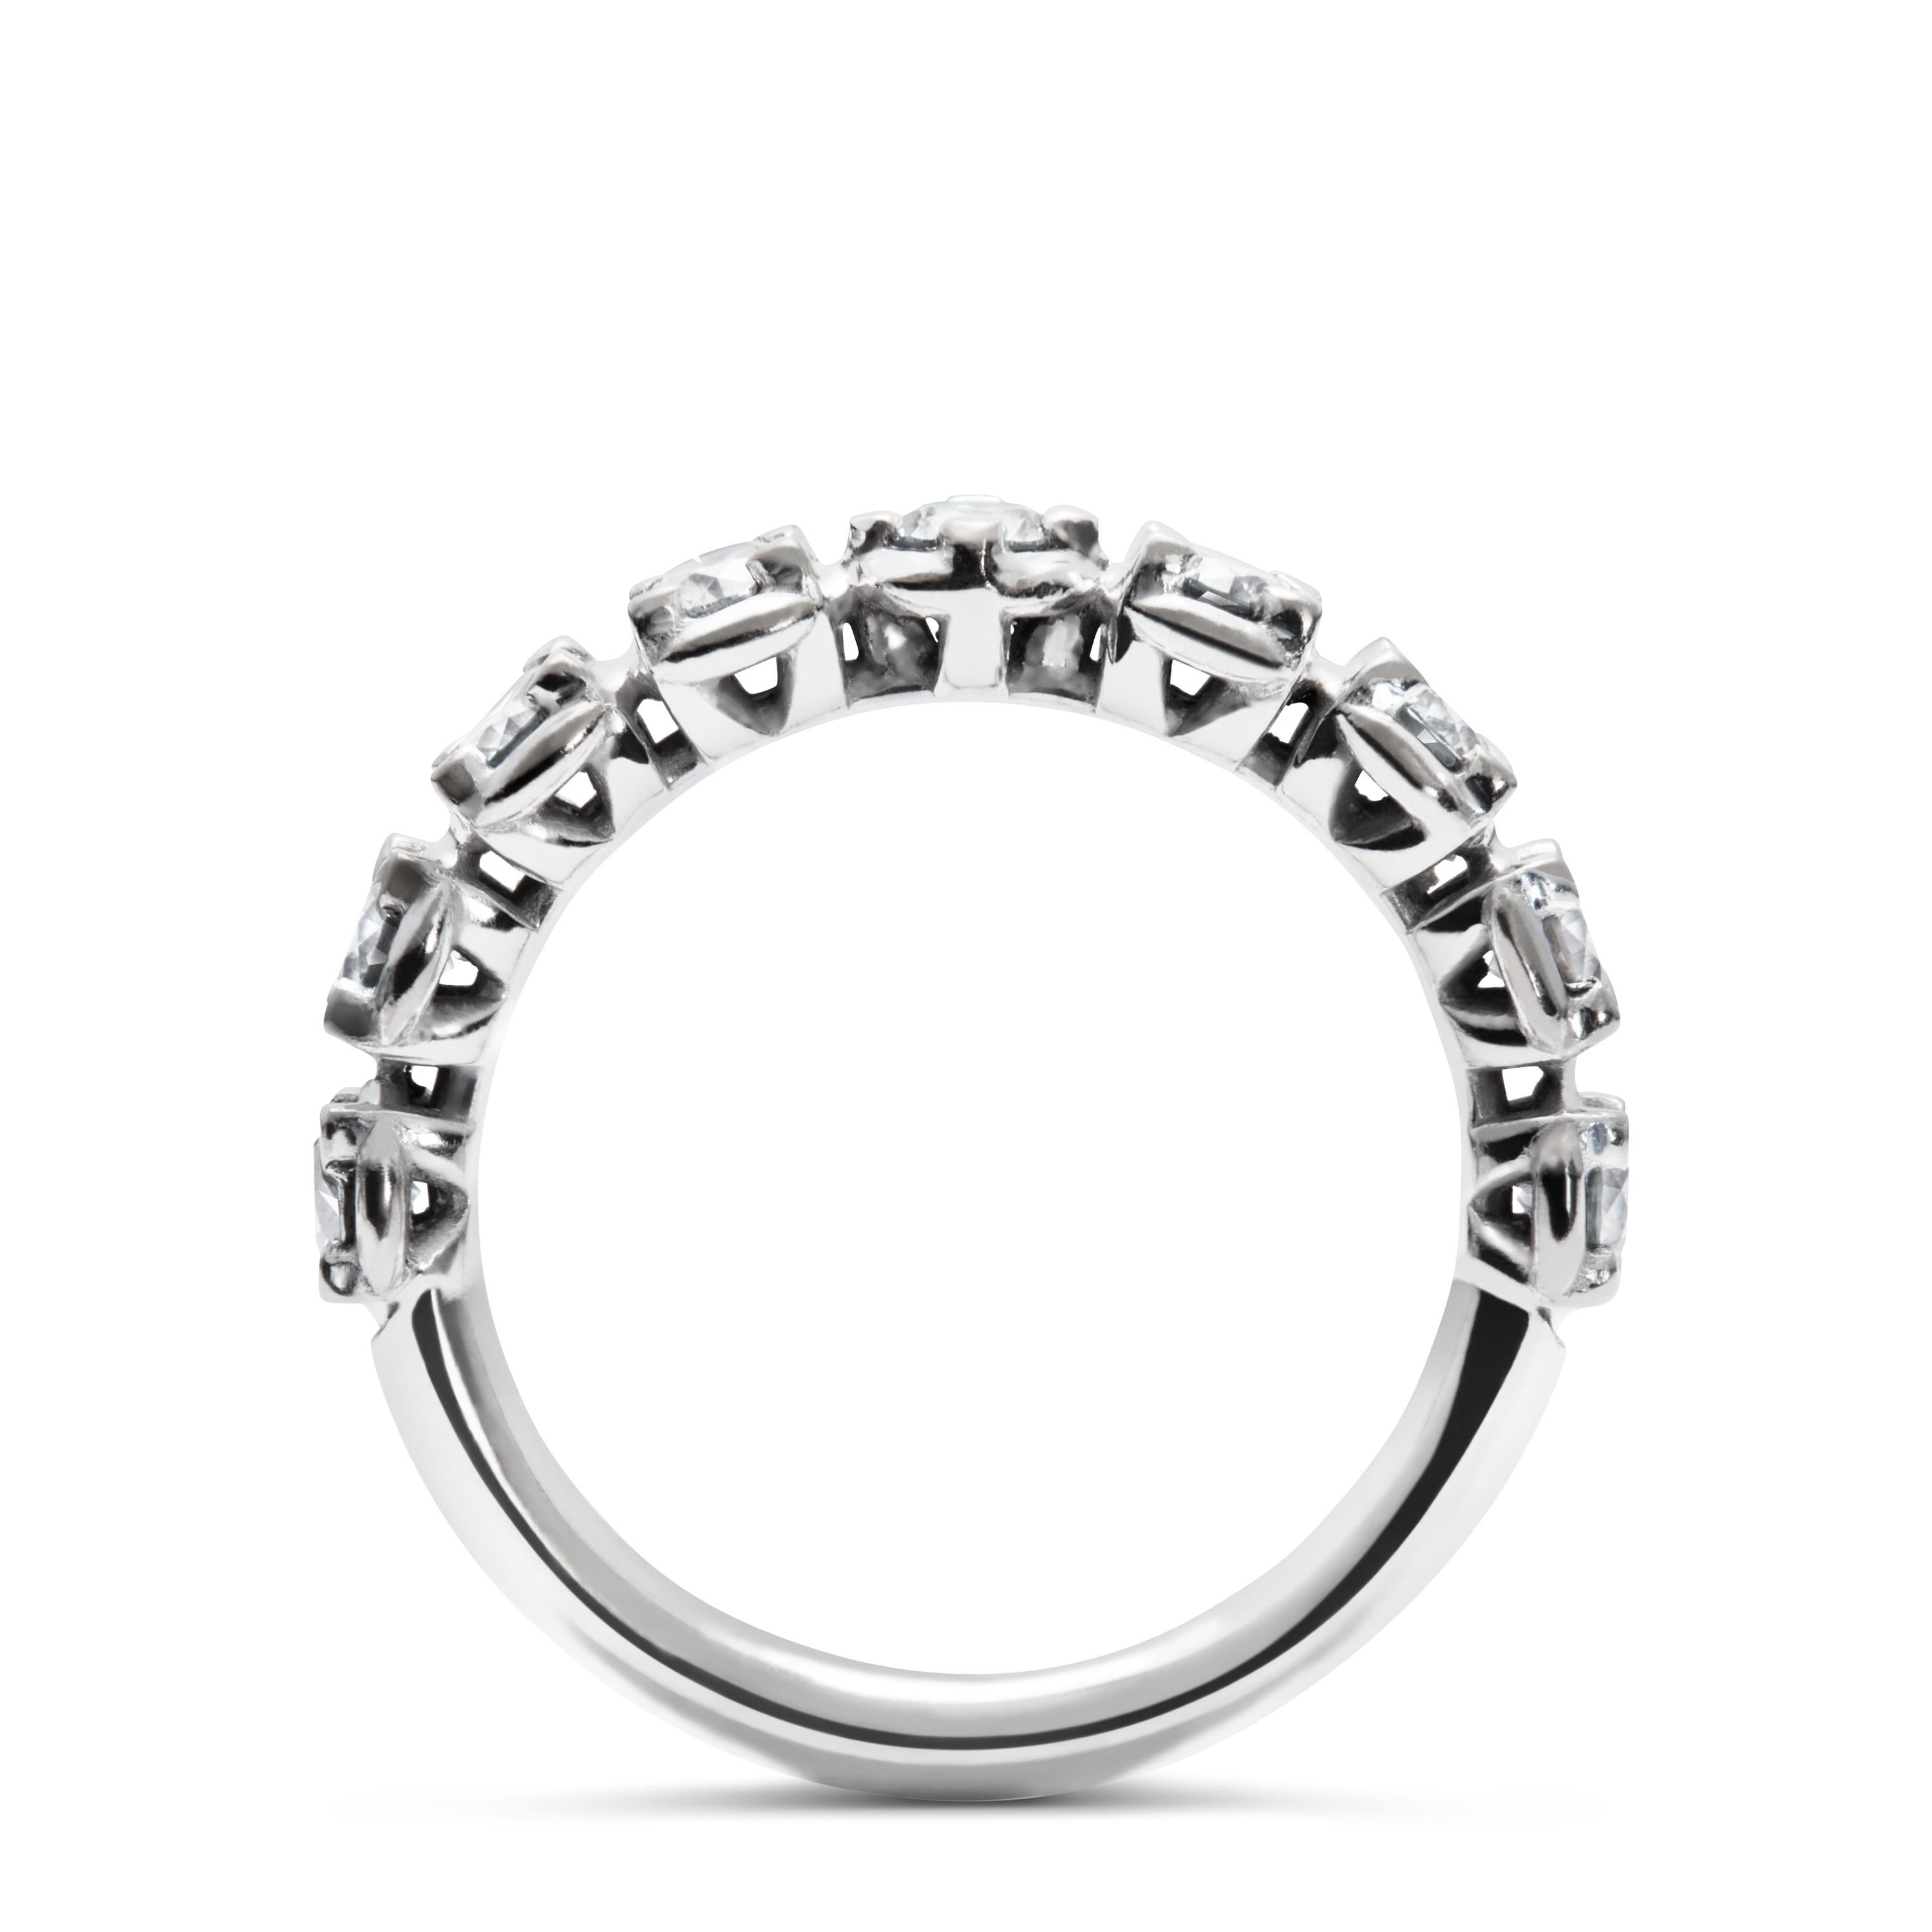 The Rocks For Life band ring is designed to maximise the brilliance and luminosity of the 9 brilliant cut diamonds, with a total weight of 0.99 carat. Our distinctive halo is carefully engineered to elevate each diamond, emphasizing their size while